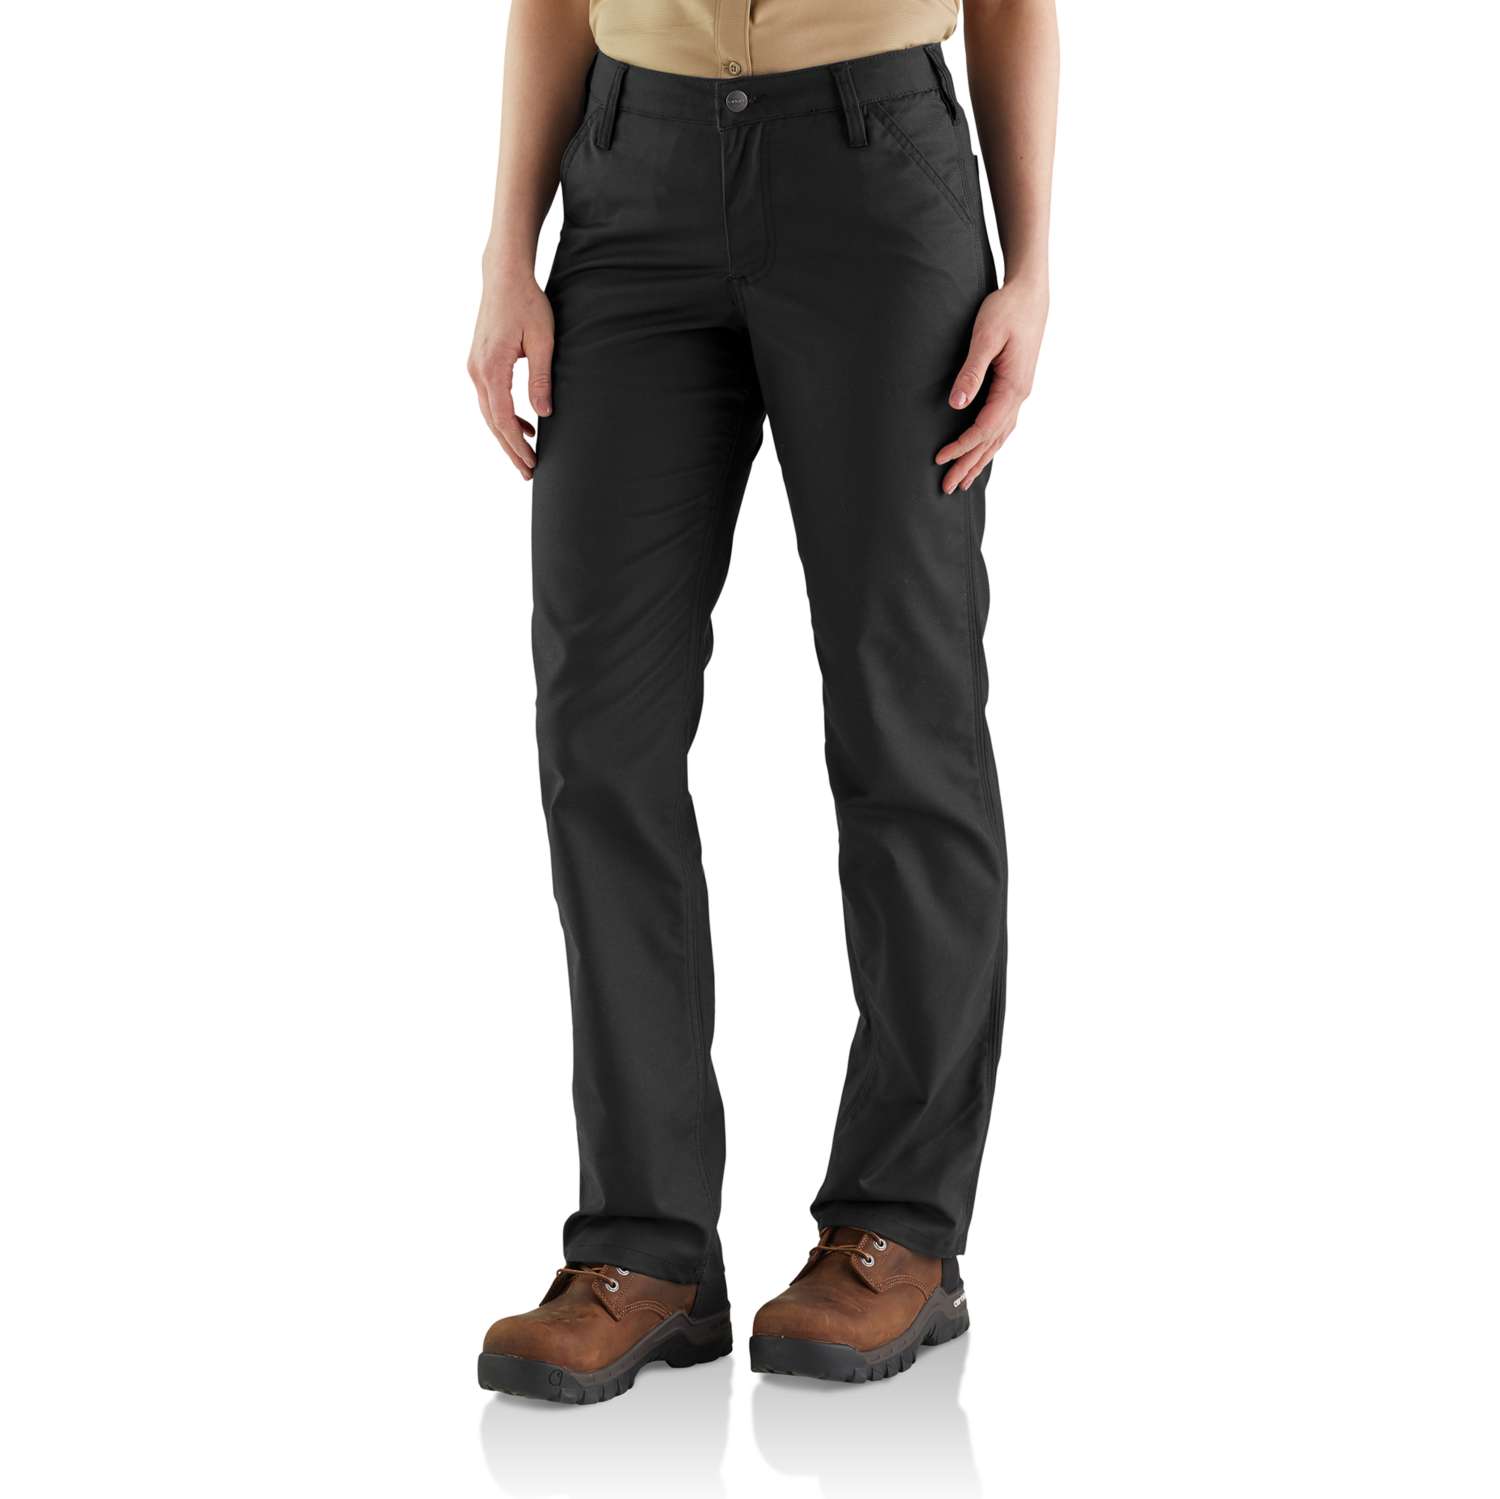 RUGGED_PROFESSIONAL_PANTS_OiOeO1REMe